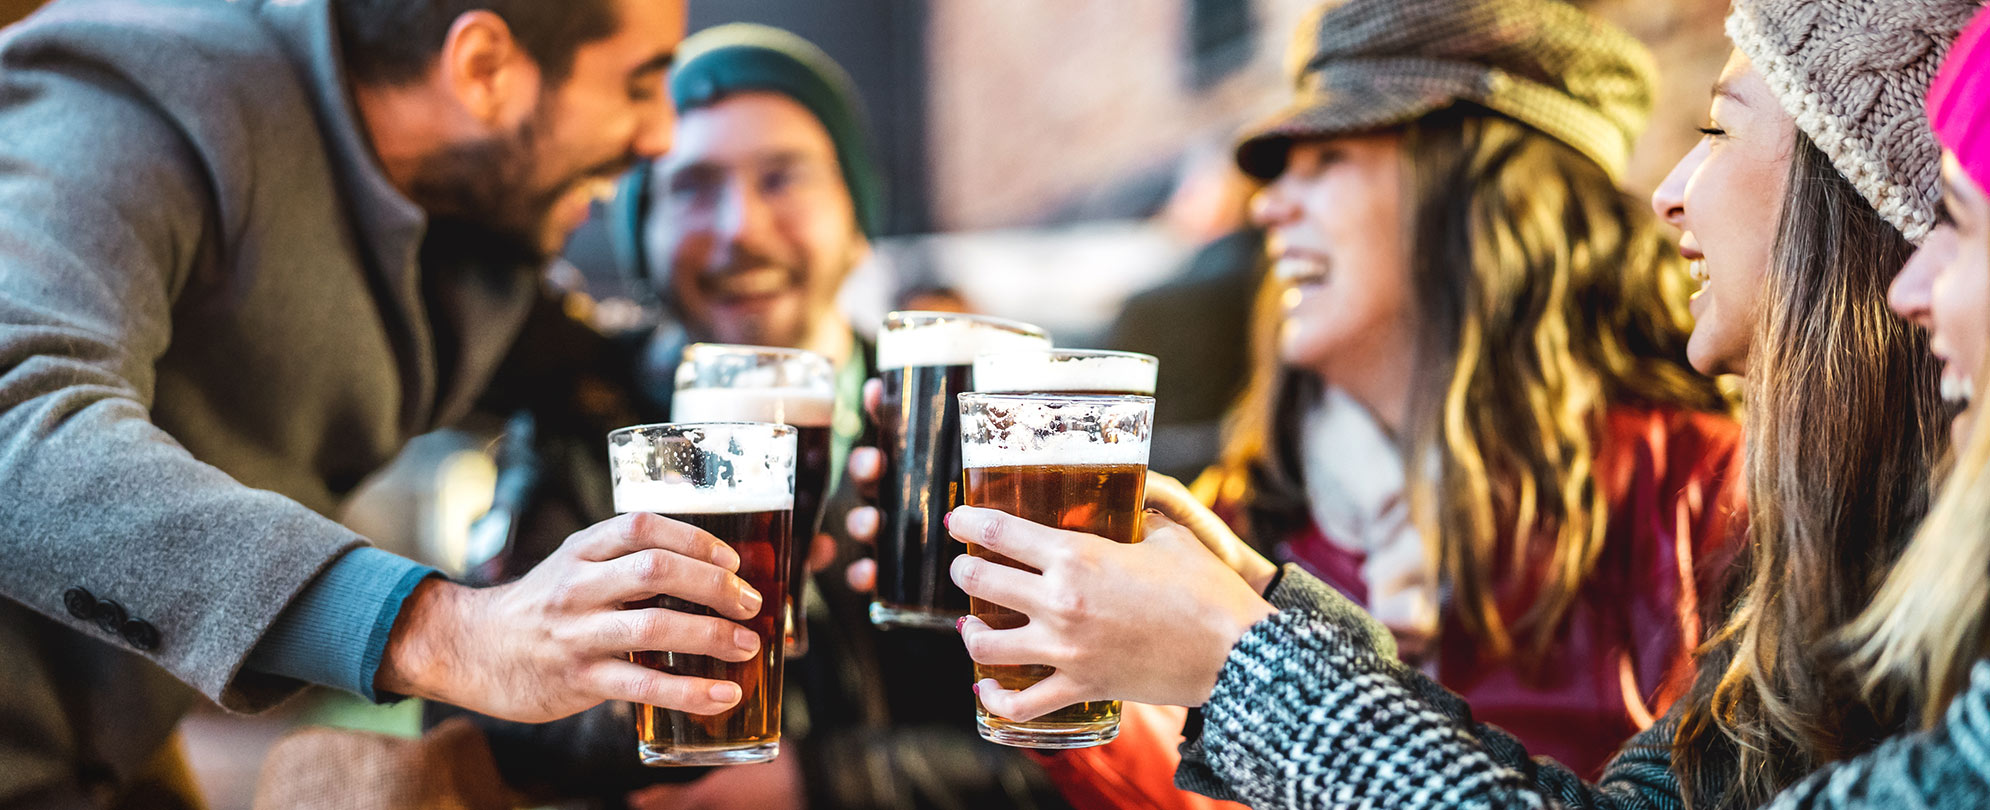 A group of friends wearing cold weather clothes share a toast by clinking their pints of beer.